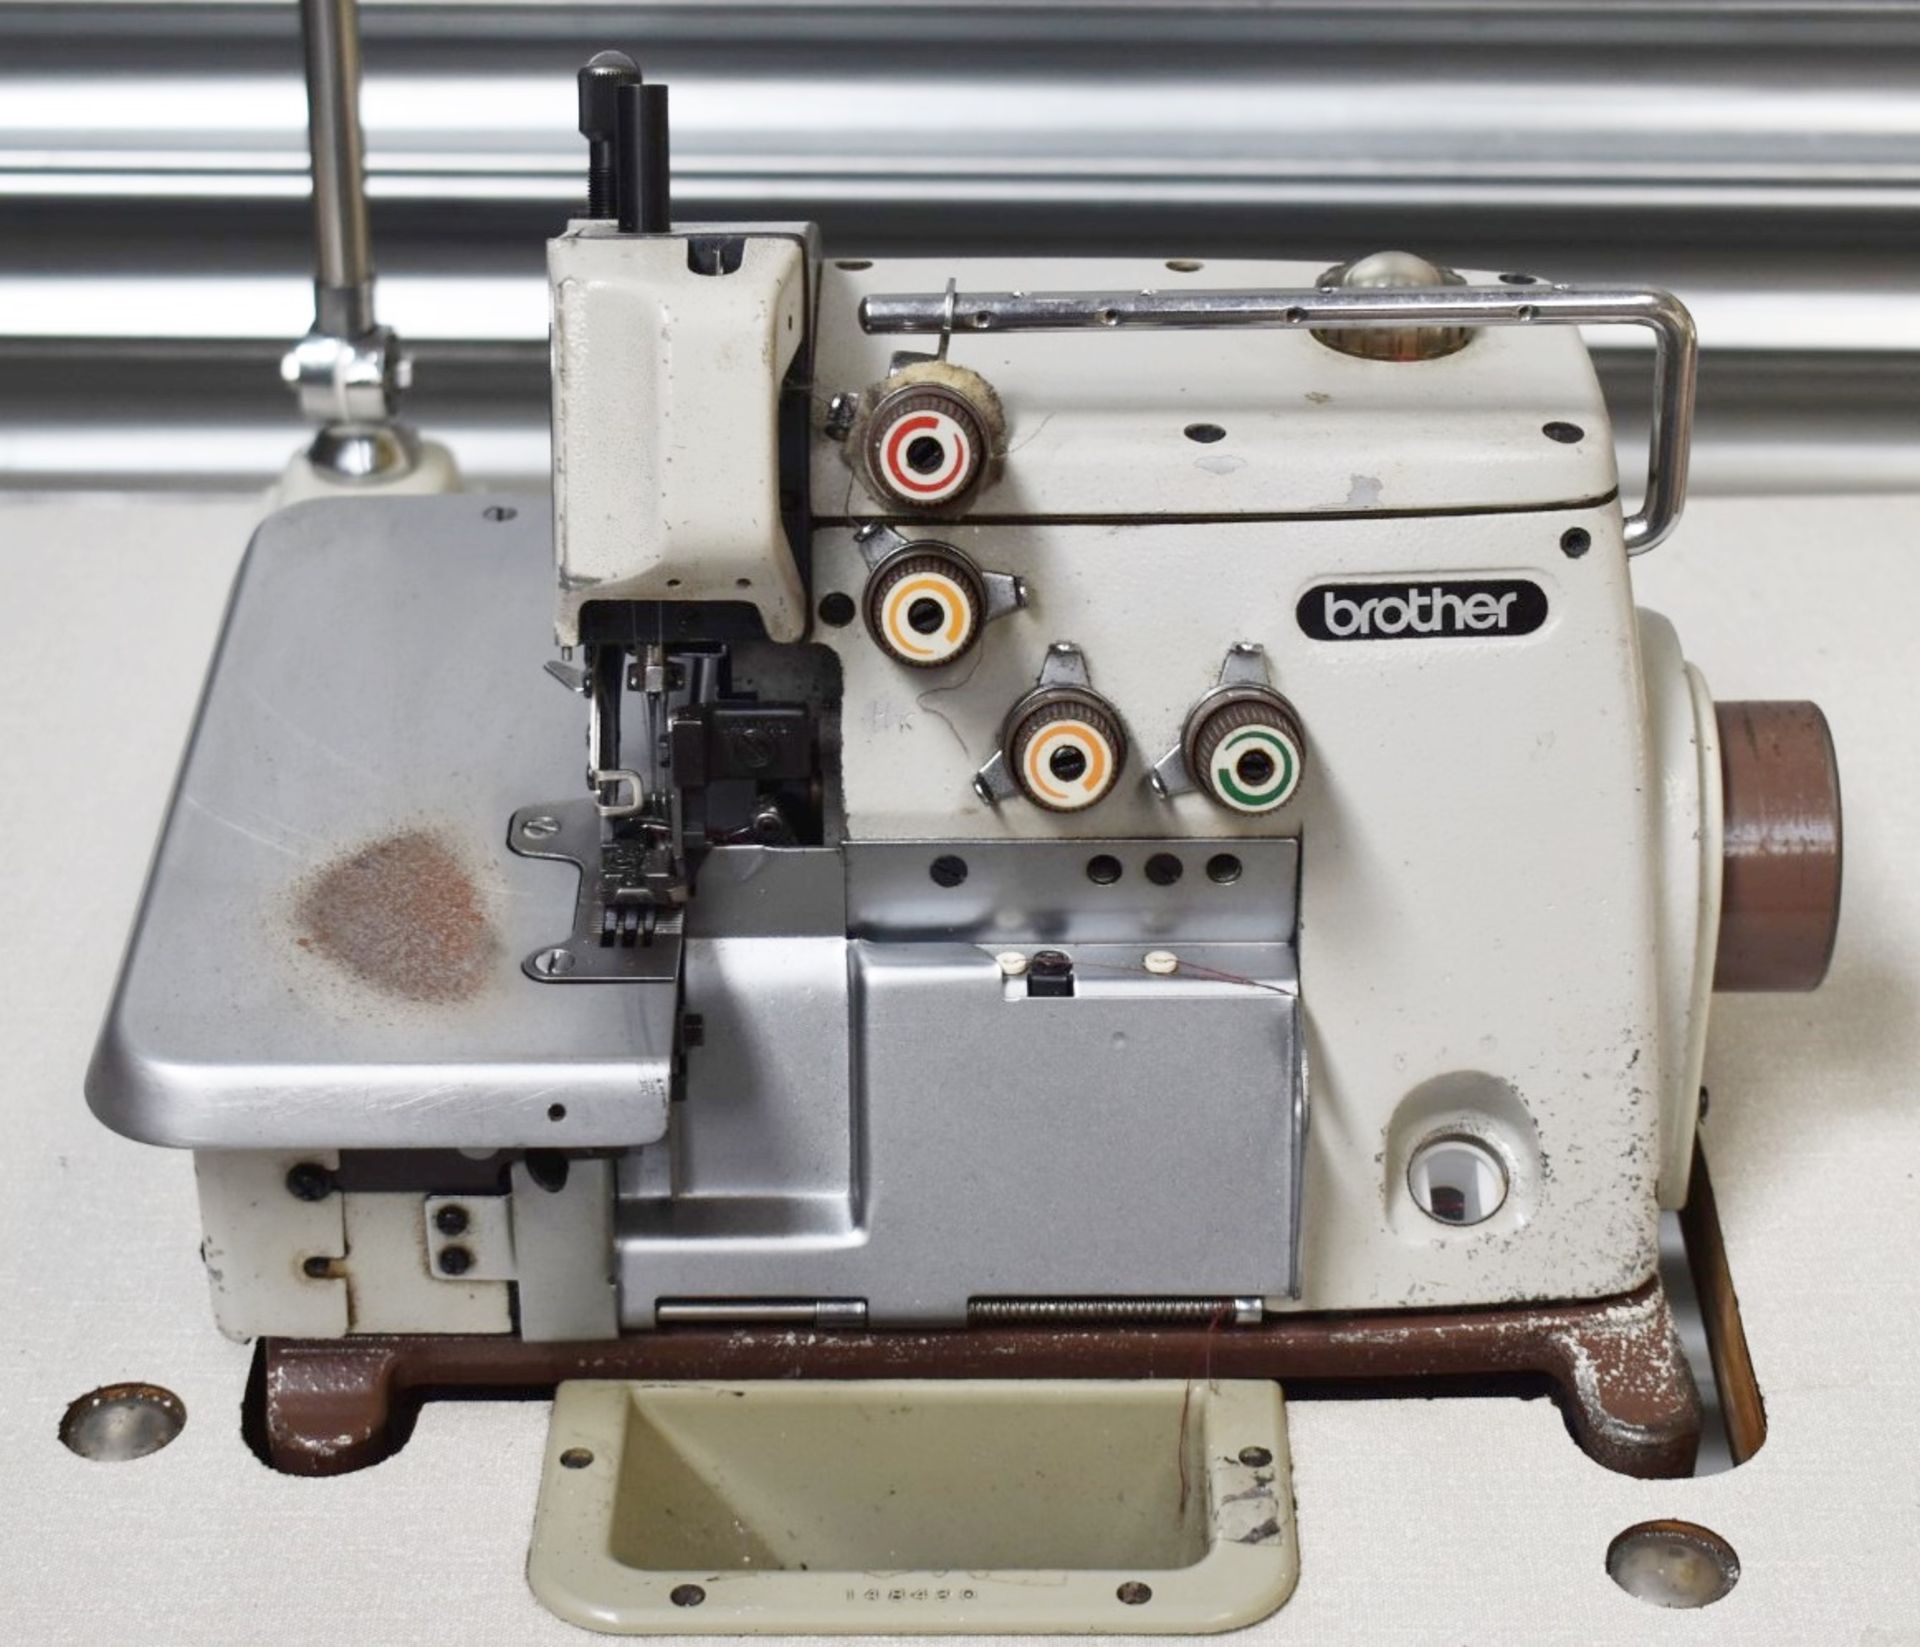 1 x Brother 3 Thread Overlock Industrial Sewing Machine - Model EF4-B511 - Image 7 of 27